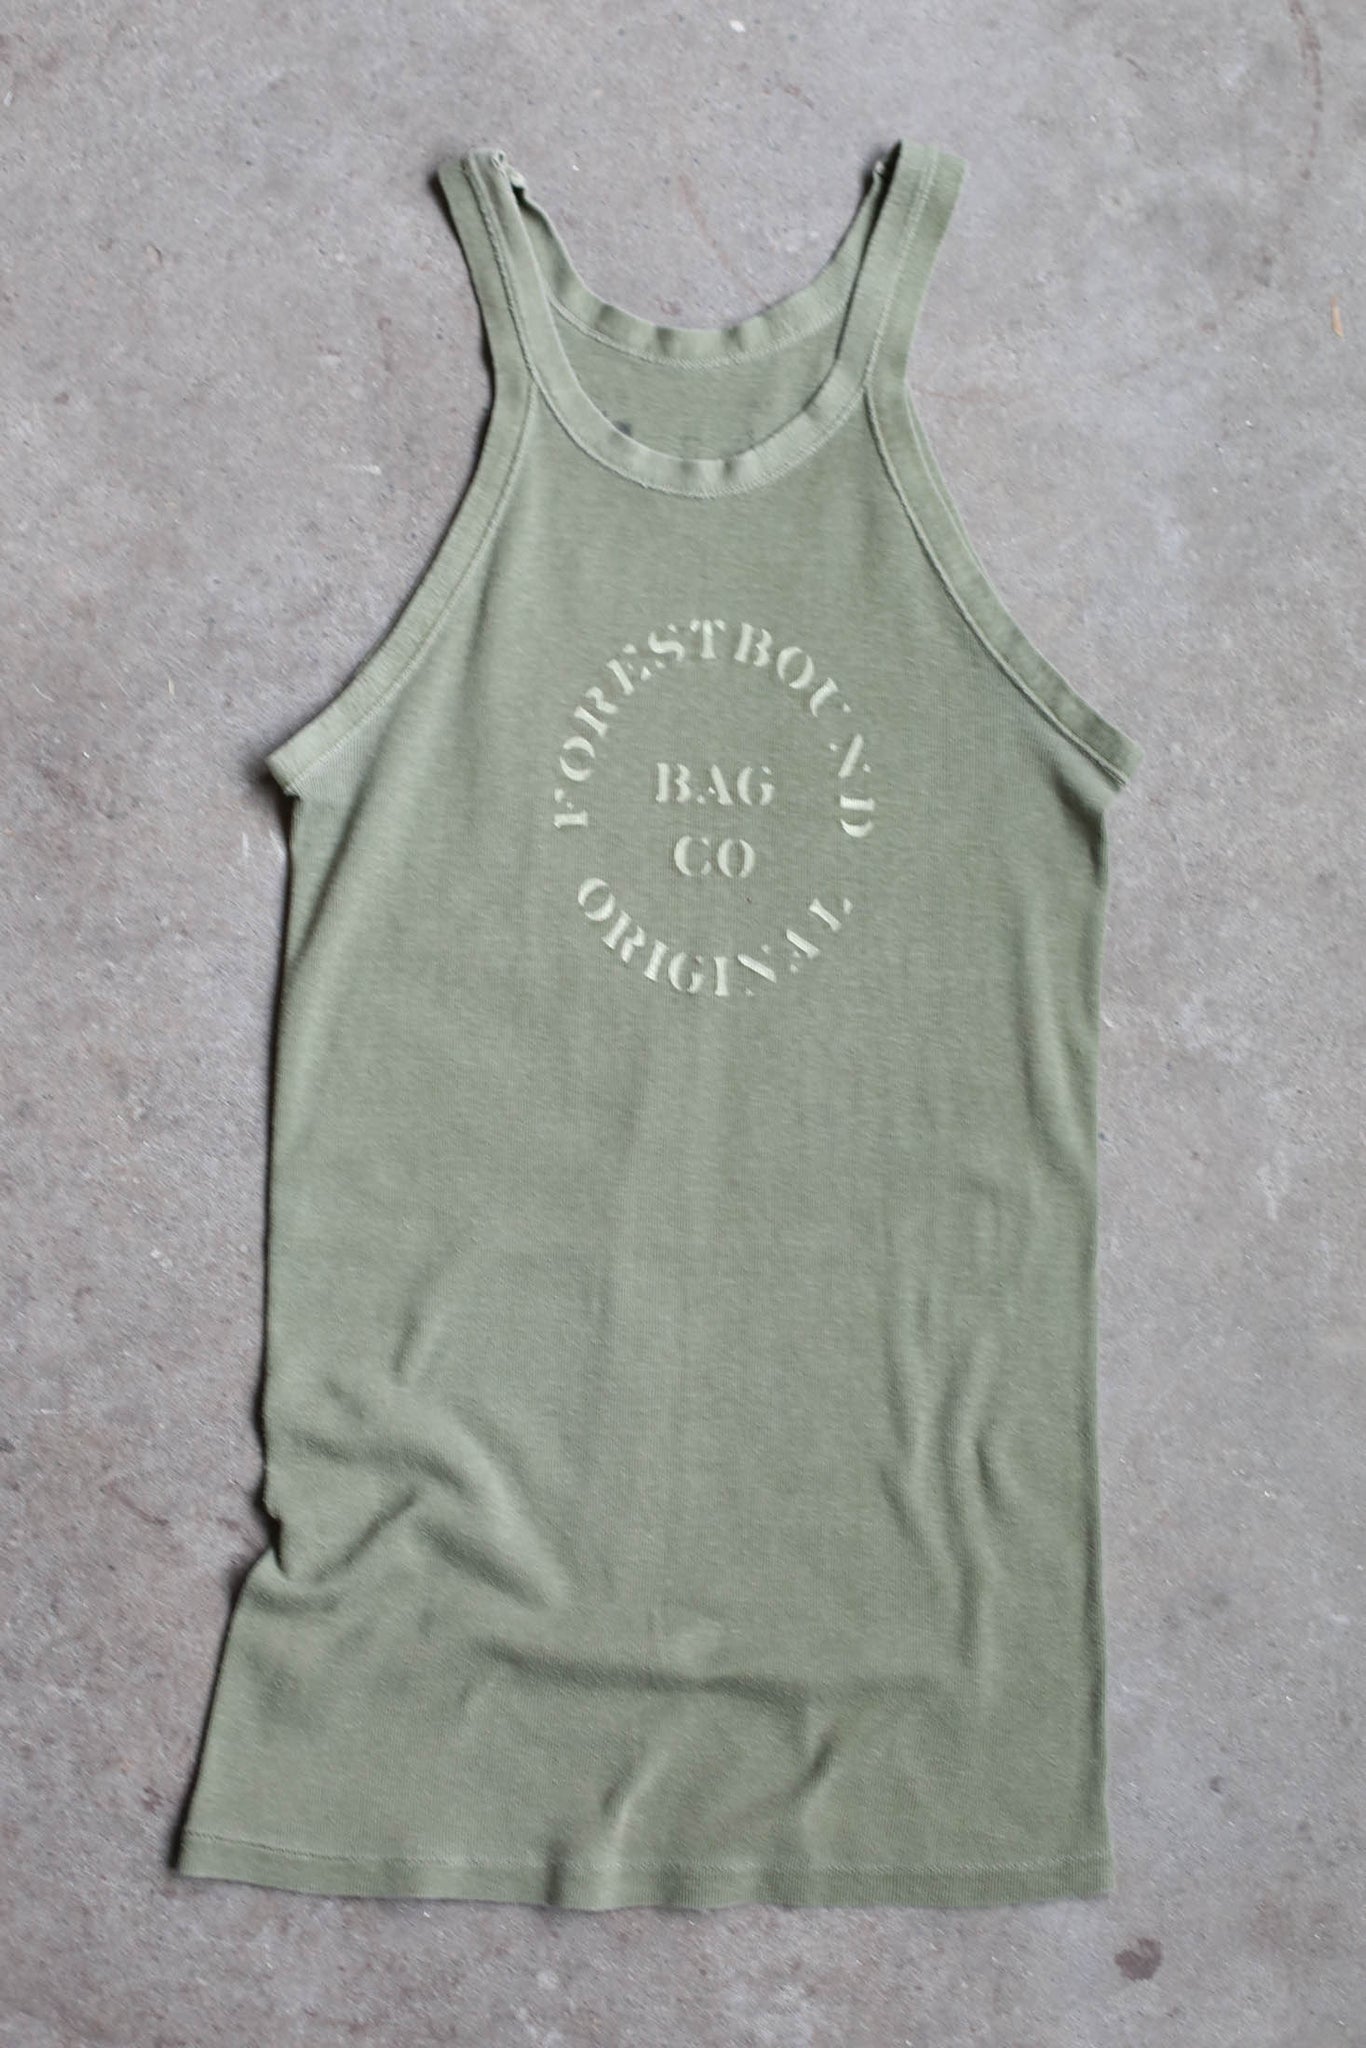 Forestbound Vintage Army Tank No. 5